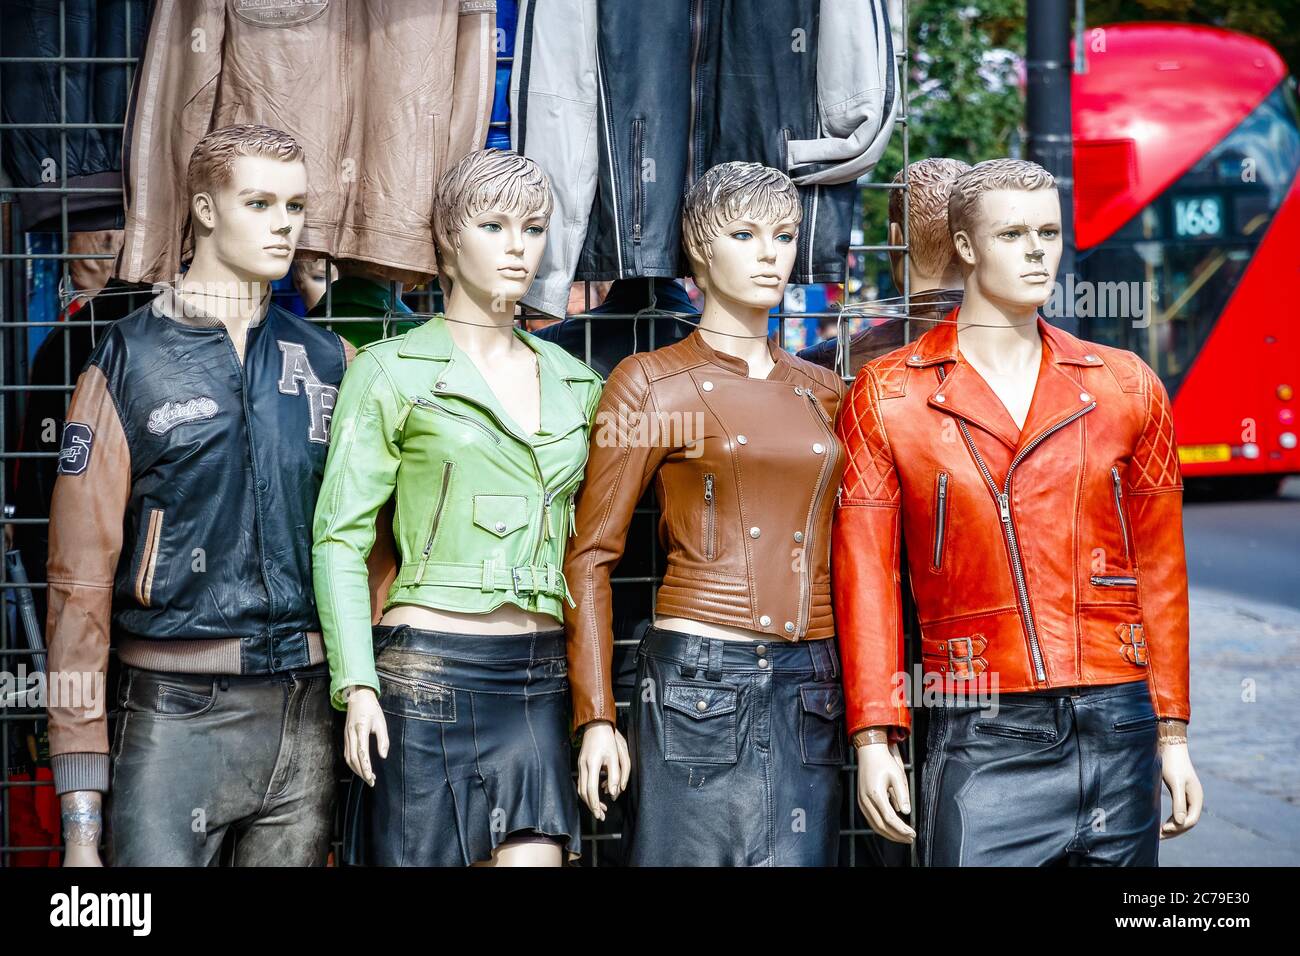 London, UK - 11 March, 2019 - Leather jackets on display at Camden street market Stock Photo